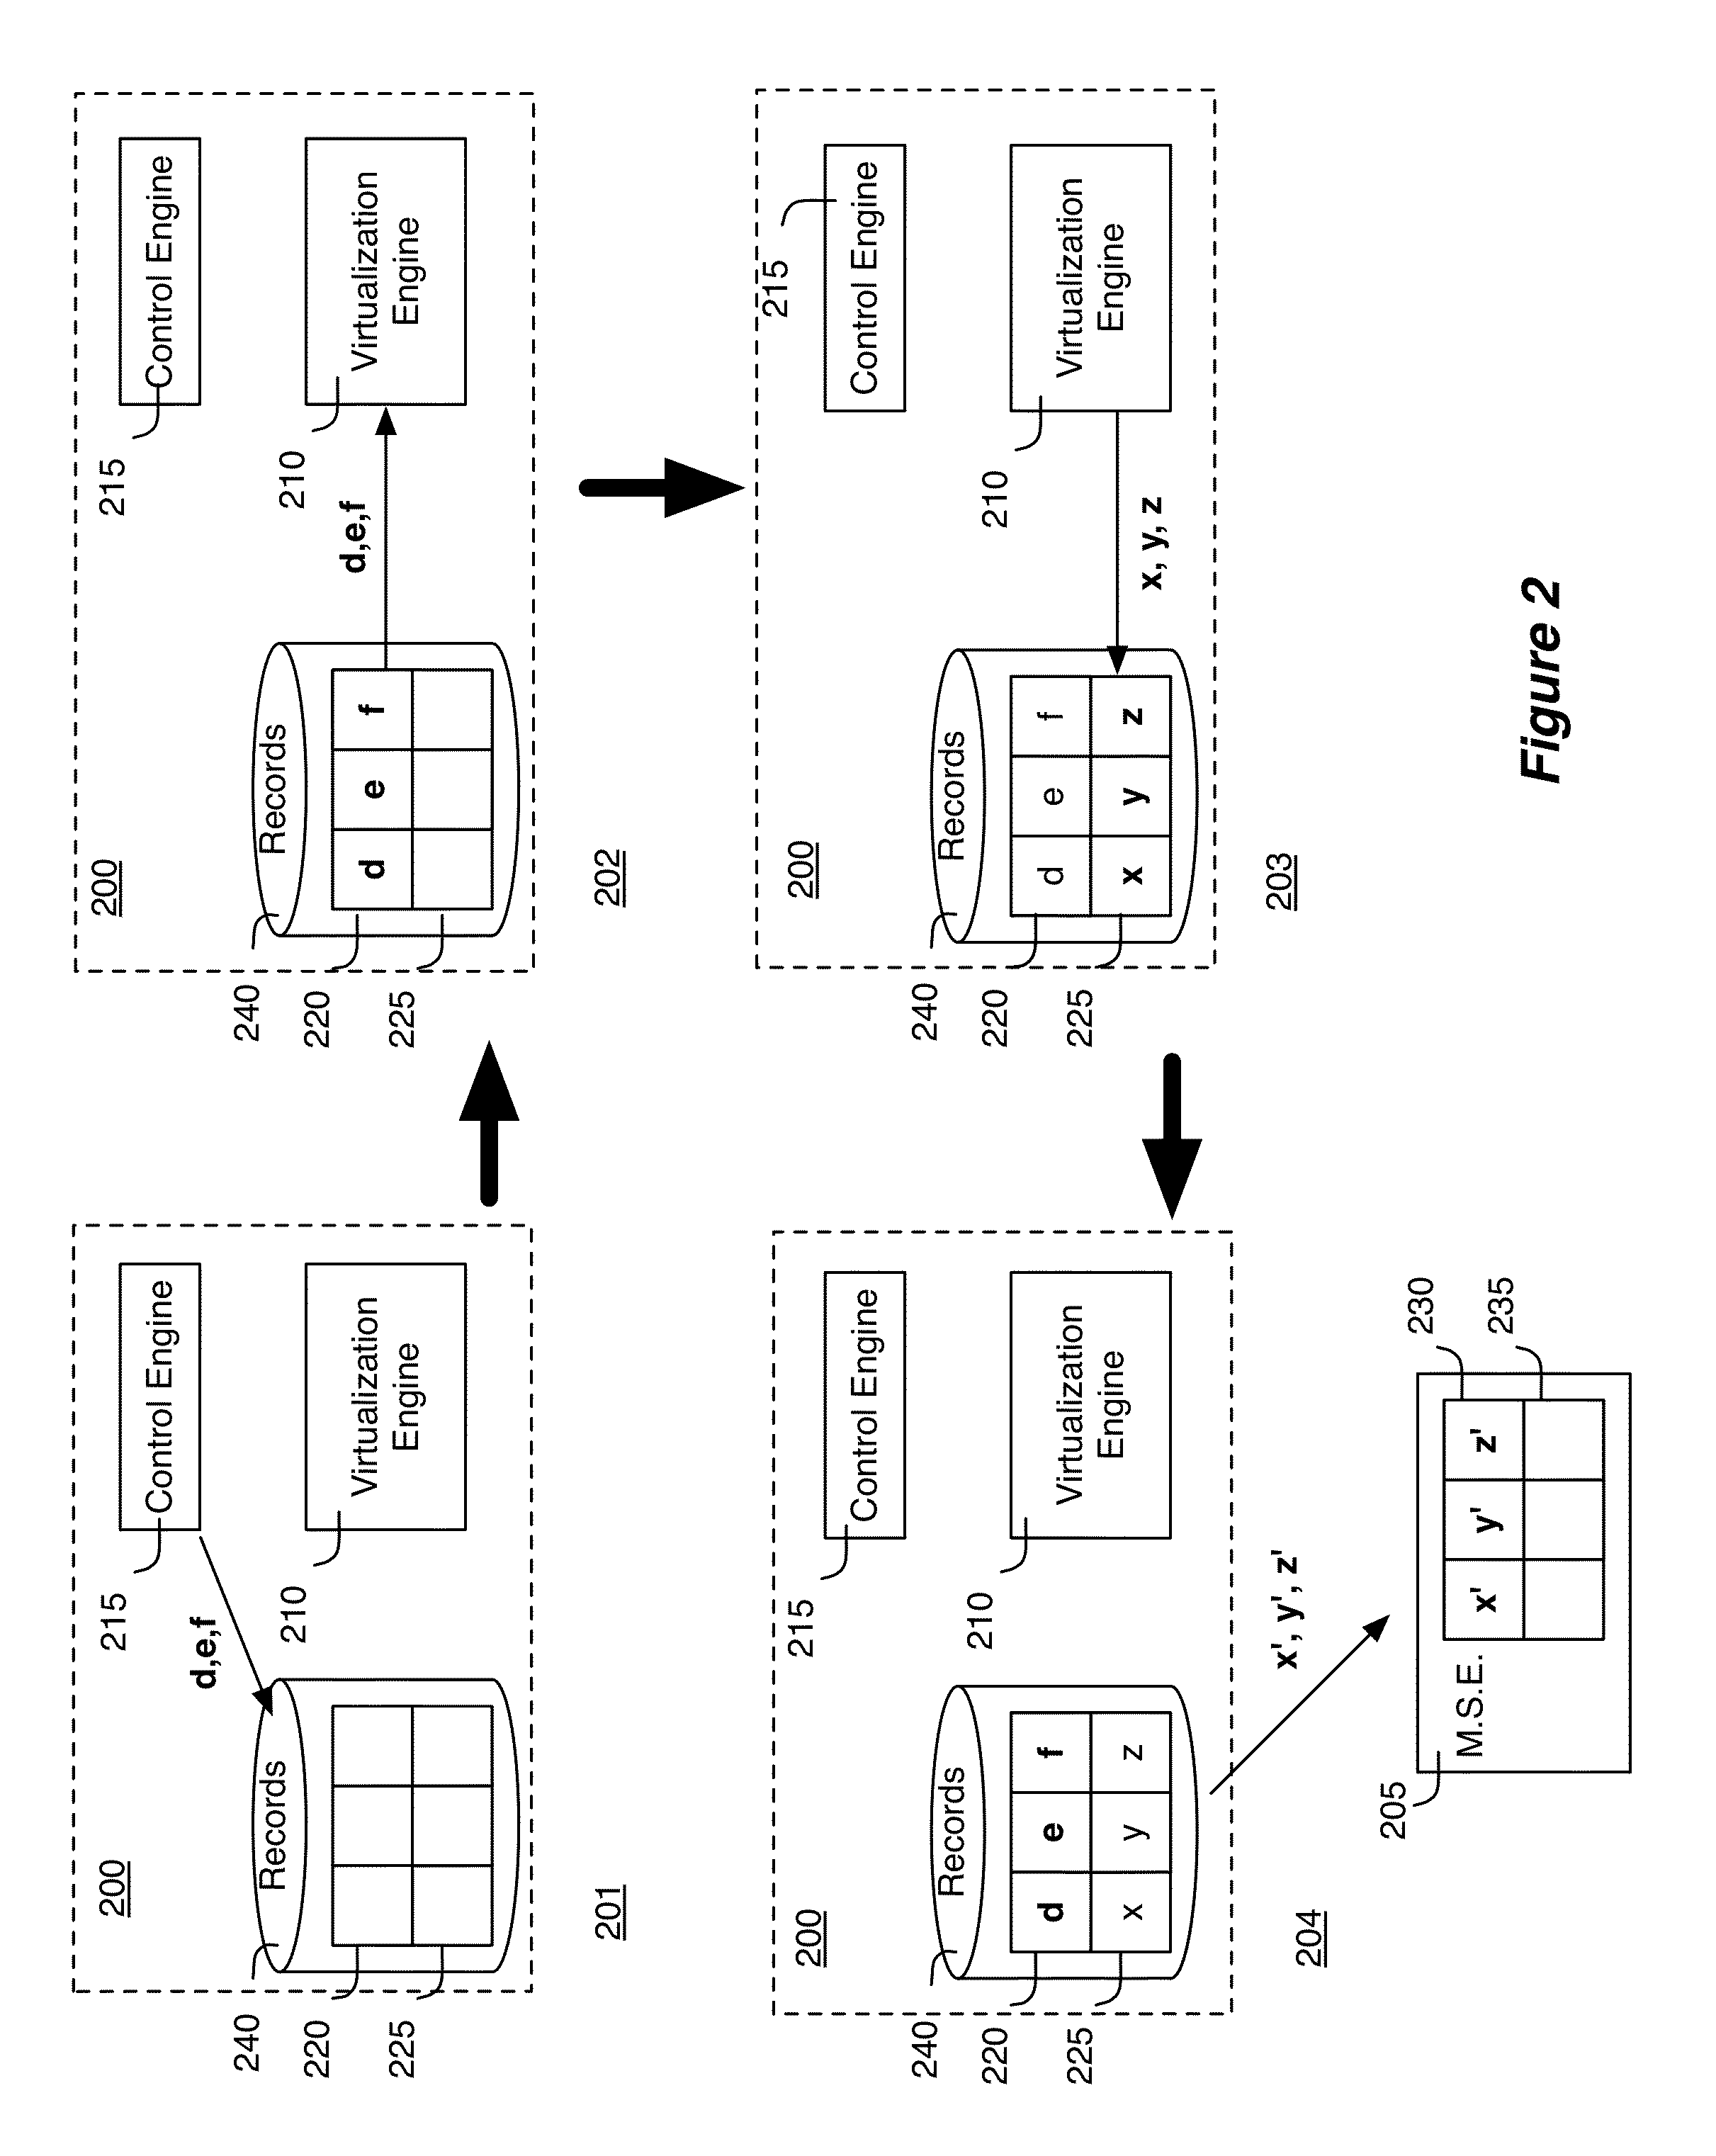 Distributed network control system